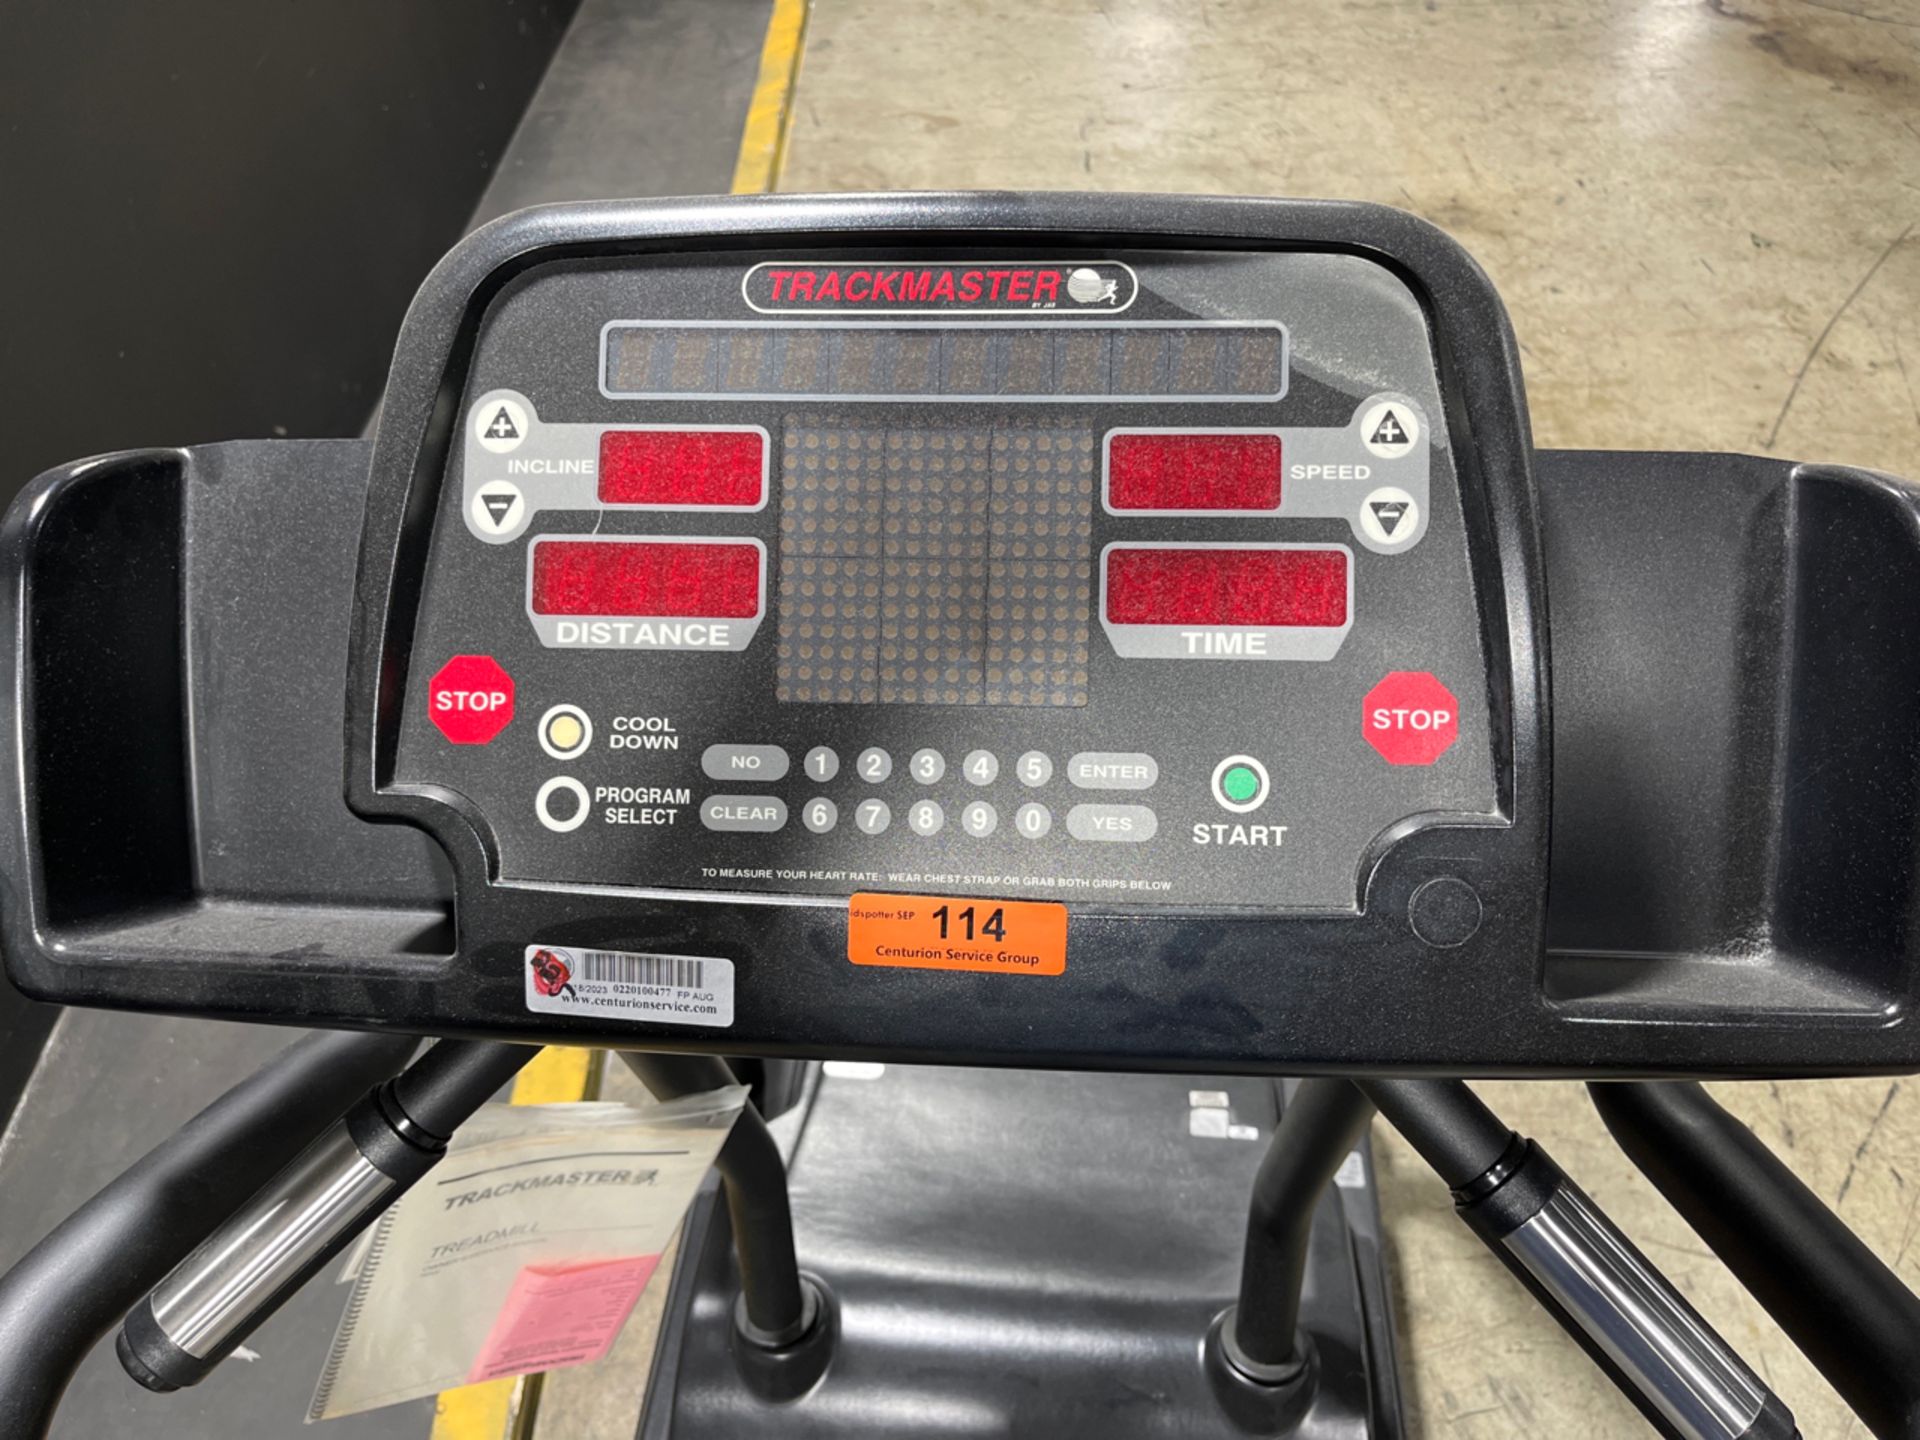 TRACKMASTER TMX55 TREADMILL (LOCATED AT 3325 MOUNT PROSPECT ROAD, FRANKLIN PARK, IL, 60131) - Image 3 of 3